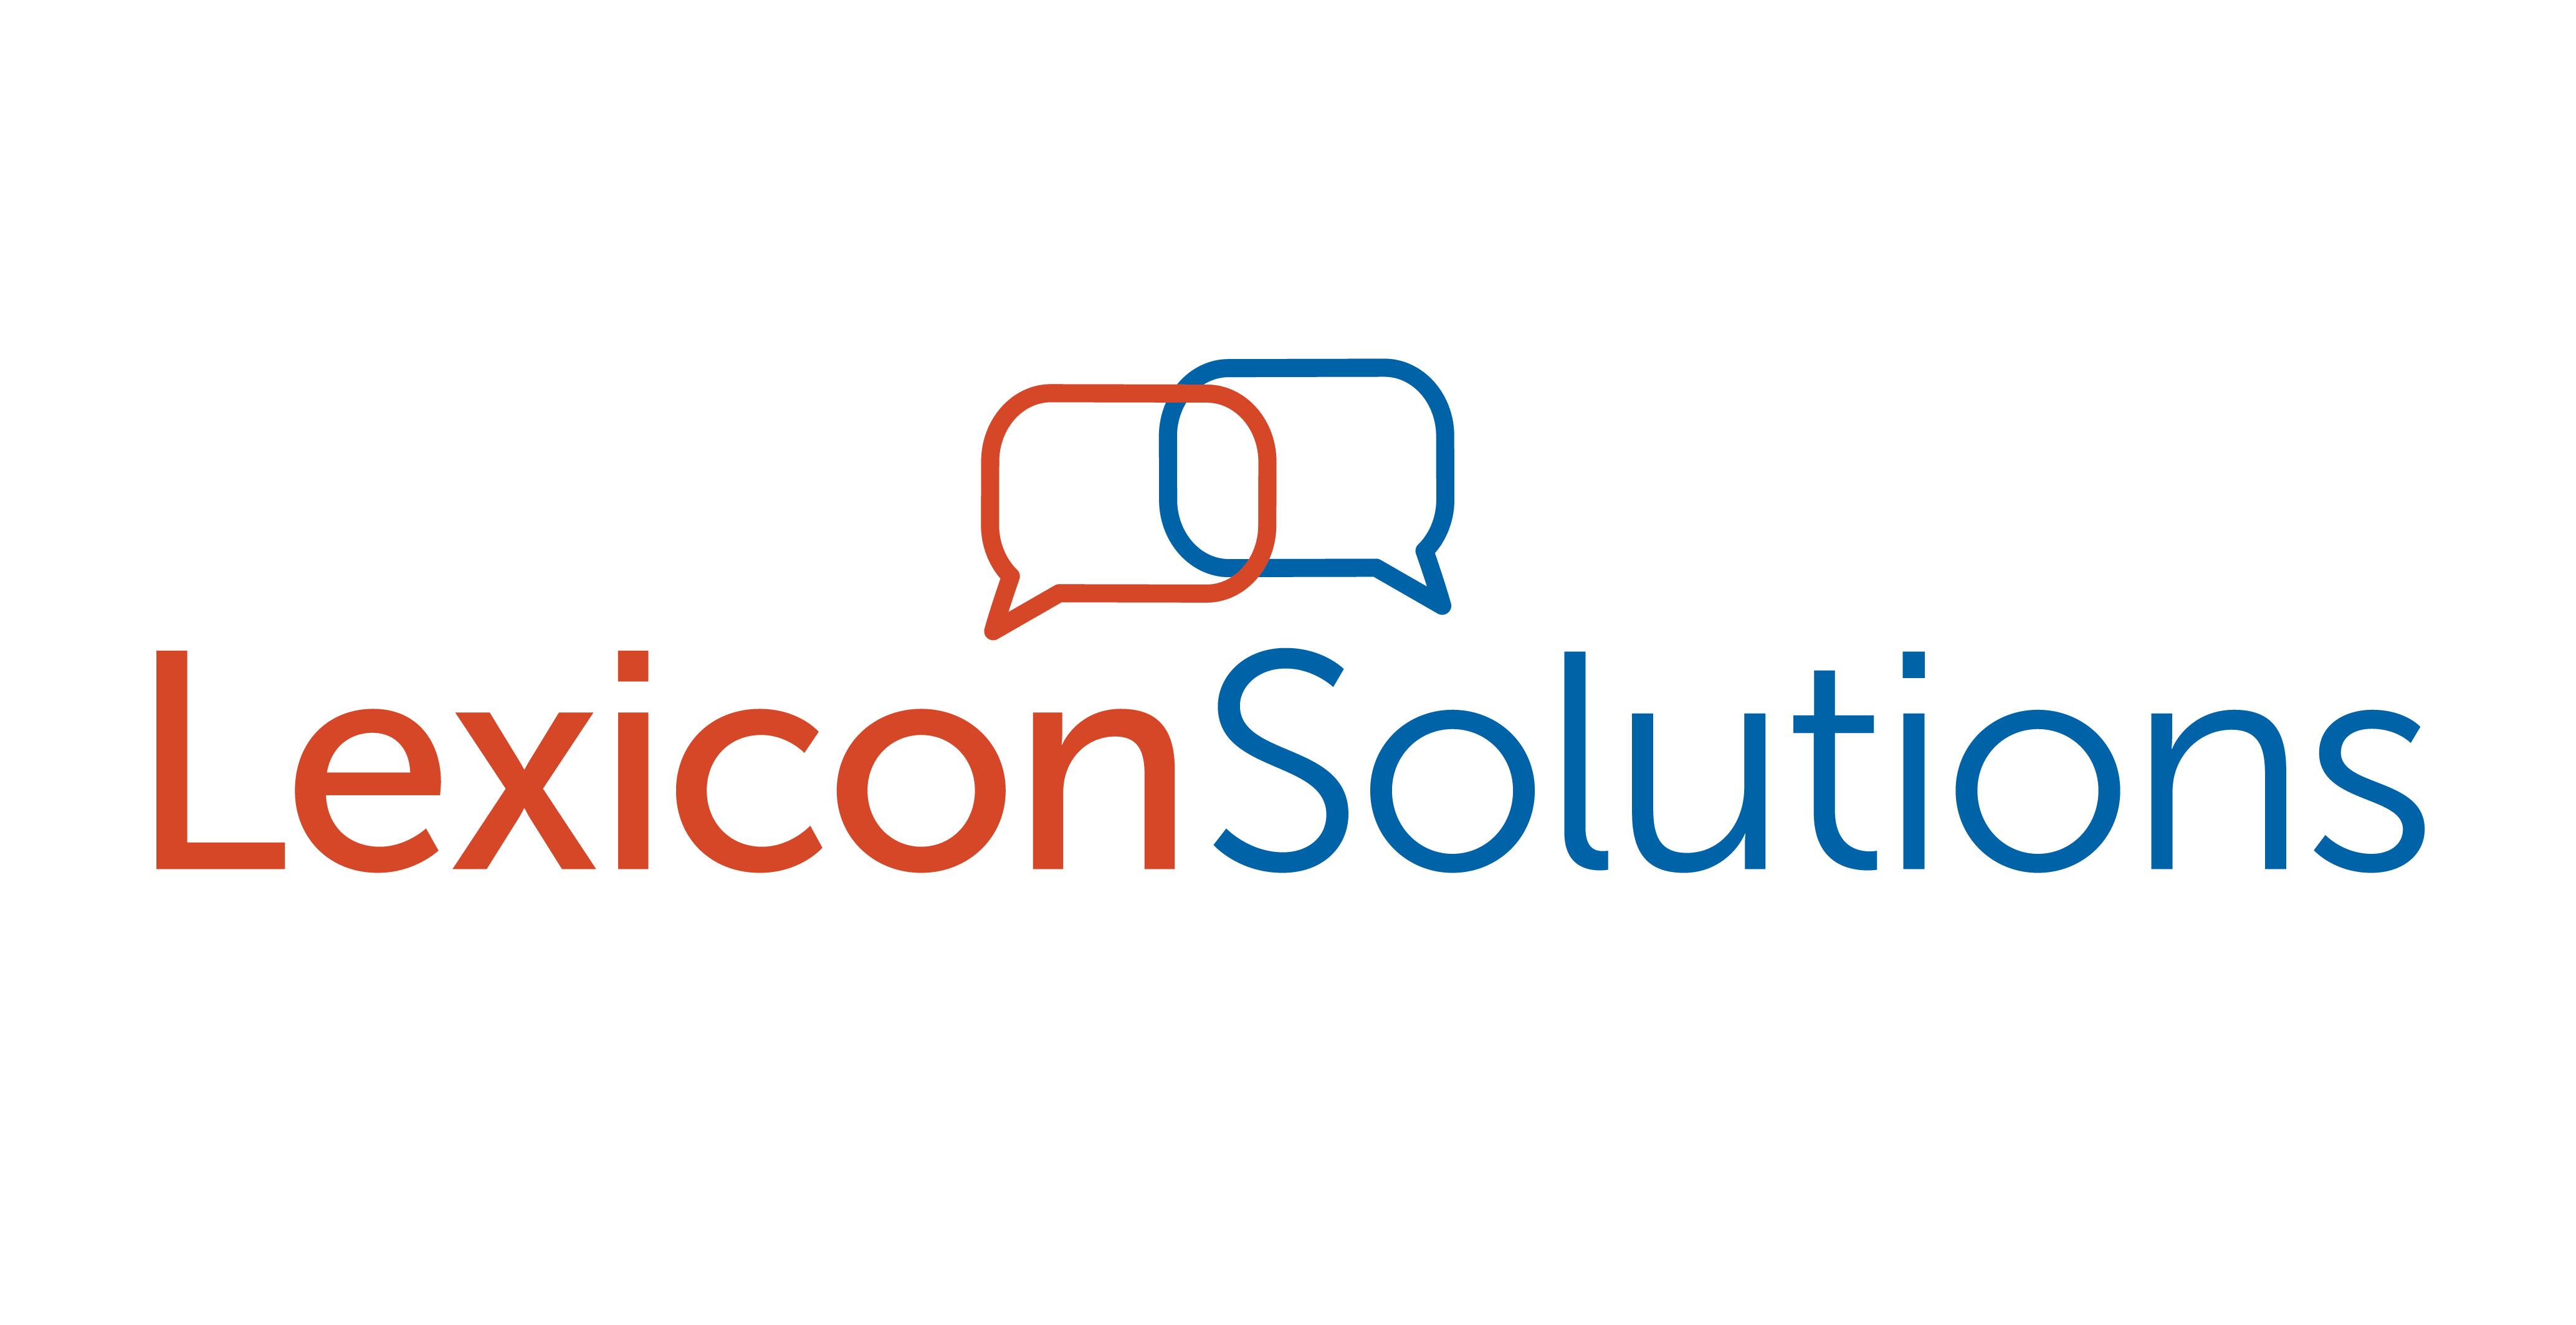 LexiconSolutions logo, Corporate Training Client of Prosper IT Consulting, The Tech Academy